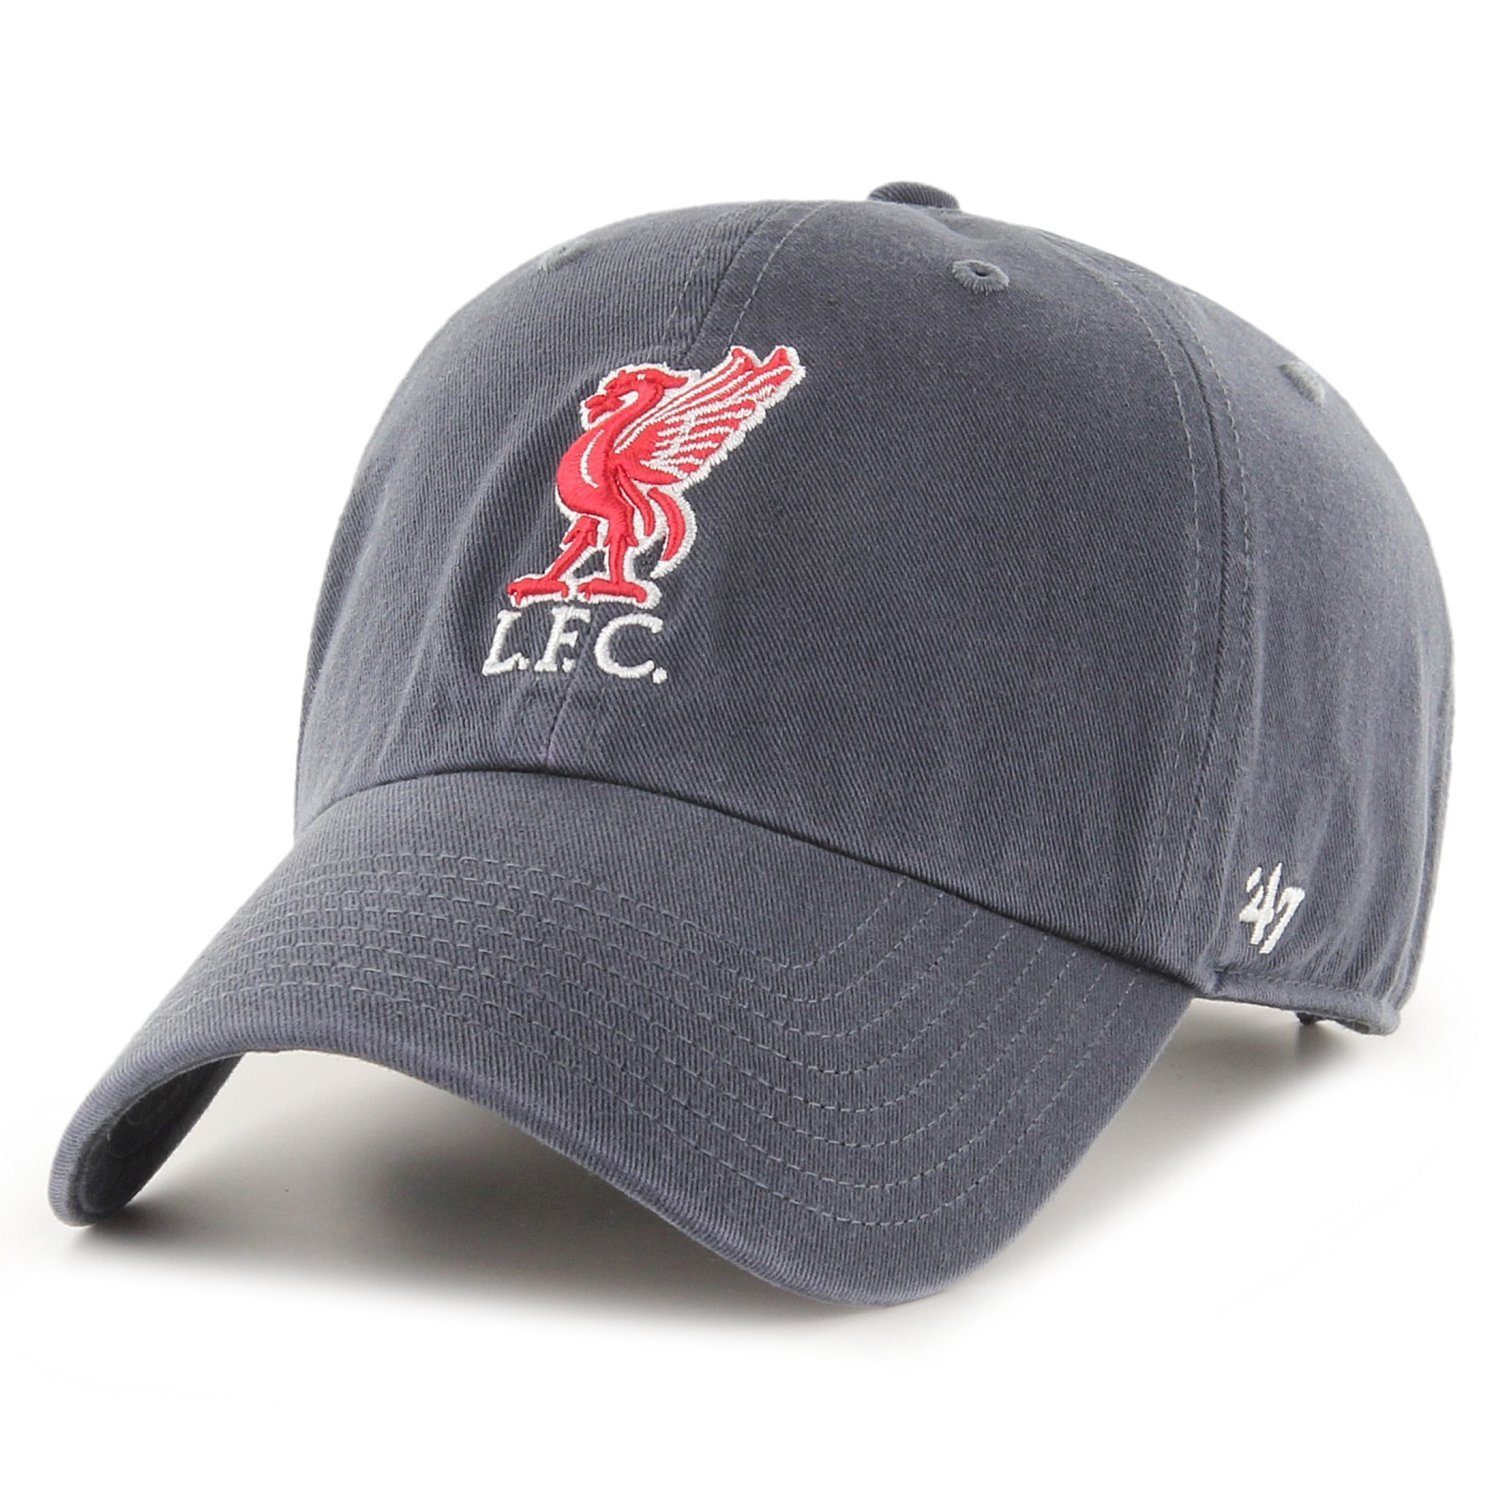 '47 Brand Trucker Cap RelaxedFit CLEAN UP Liverpool